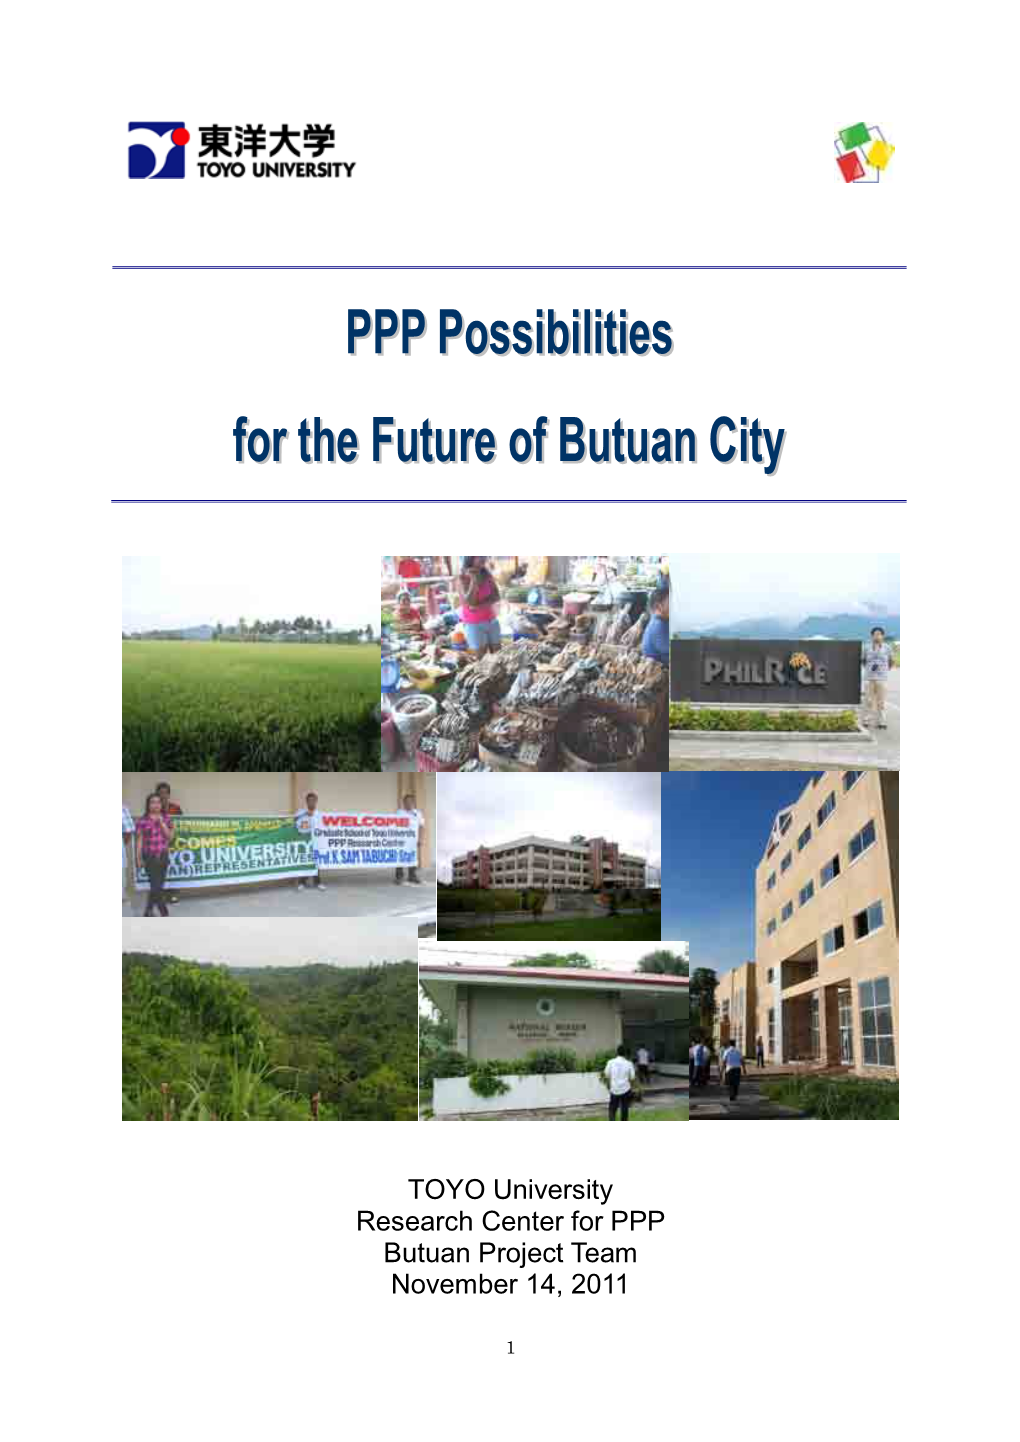 PPP Possibilities for the Future of Butuan City